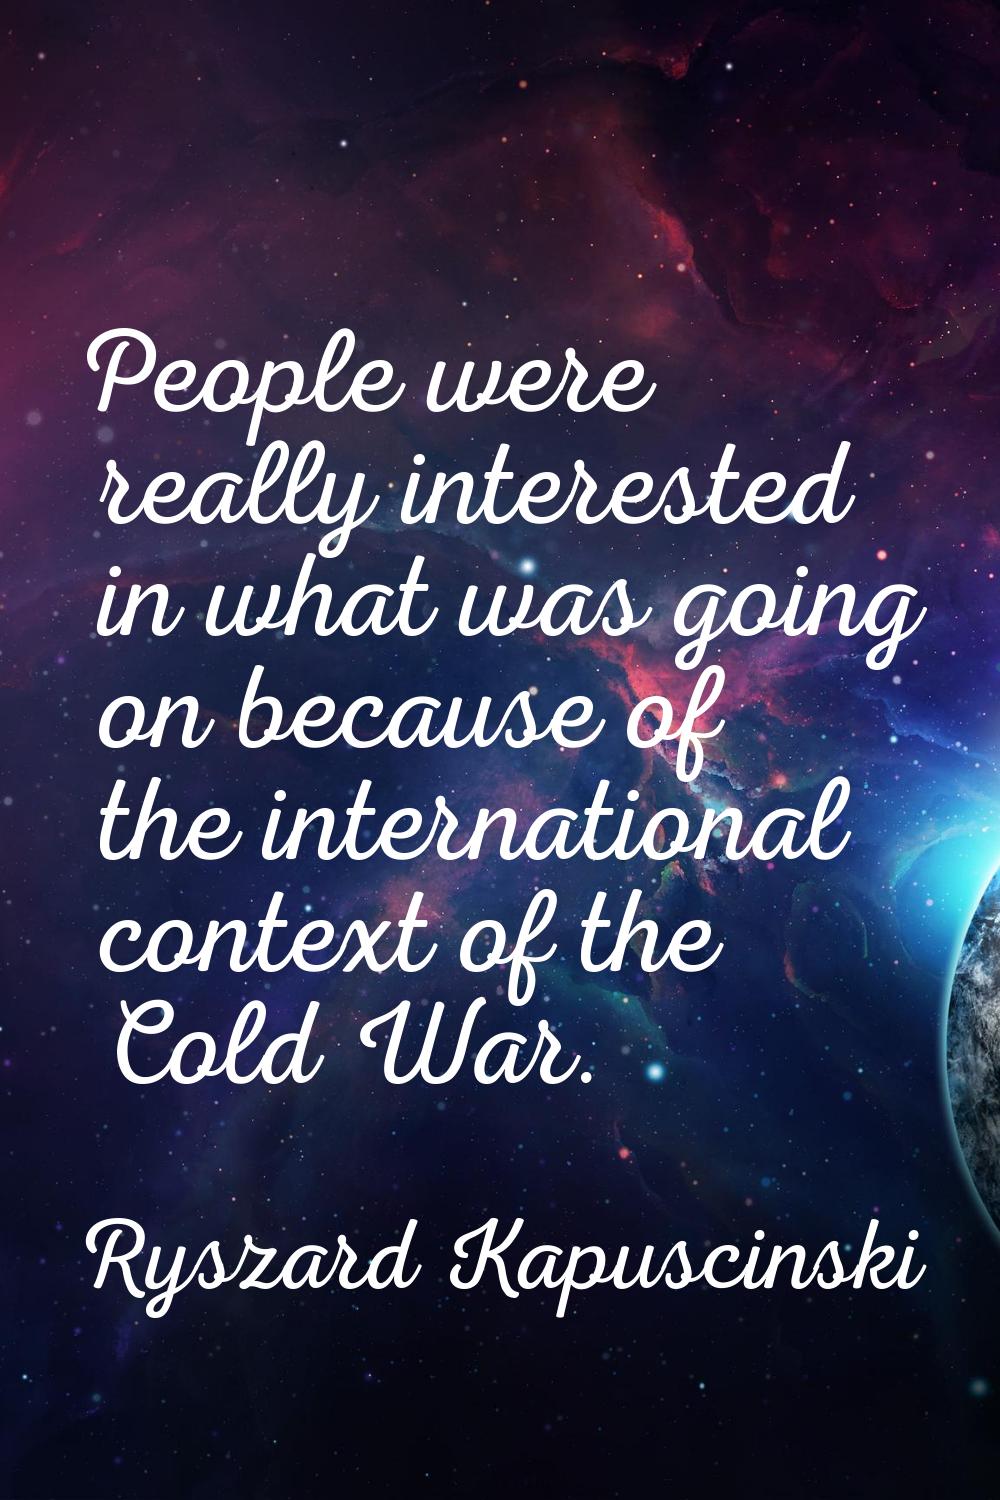 People were really interested in what was going on because of the international context of the Cold